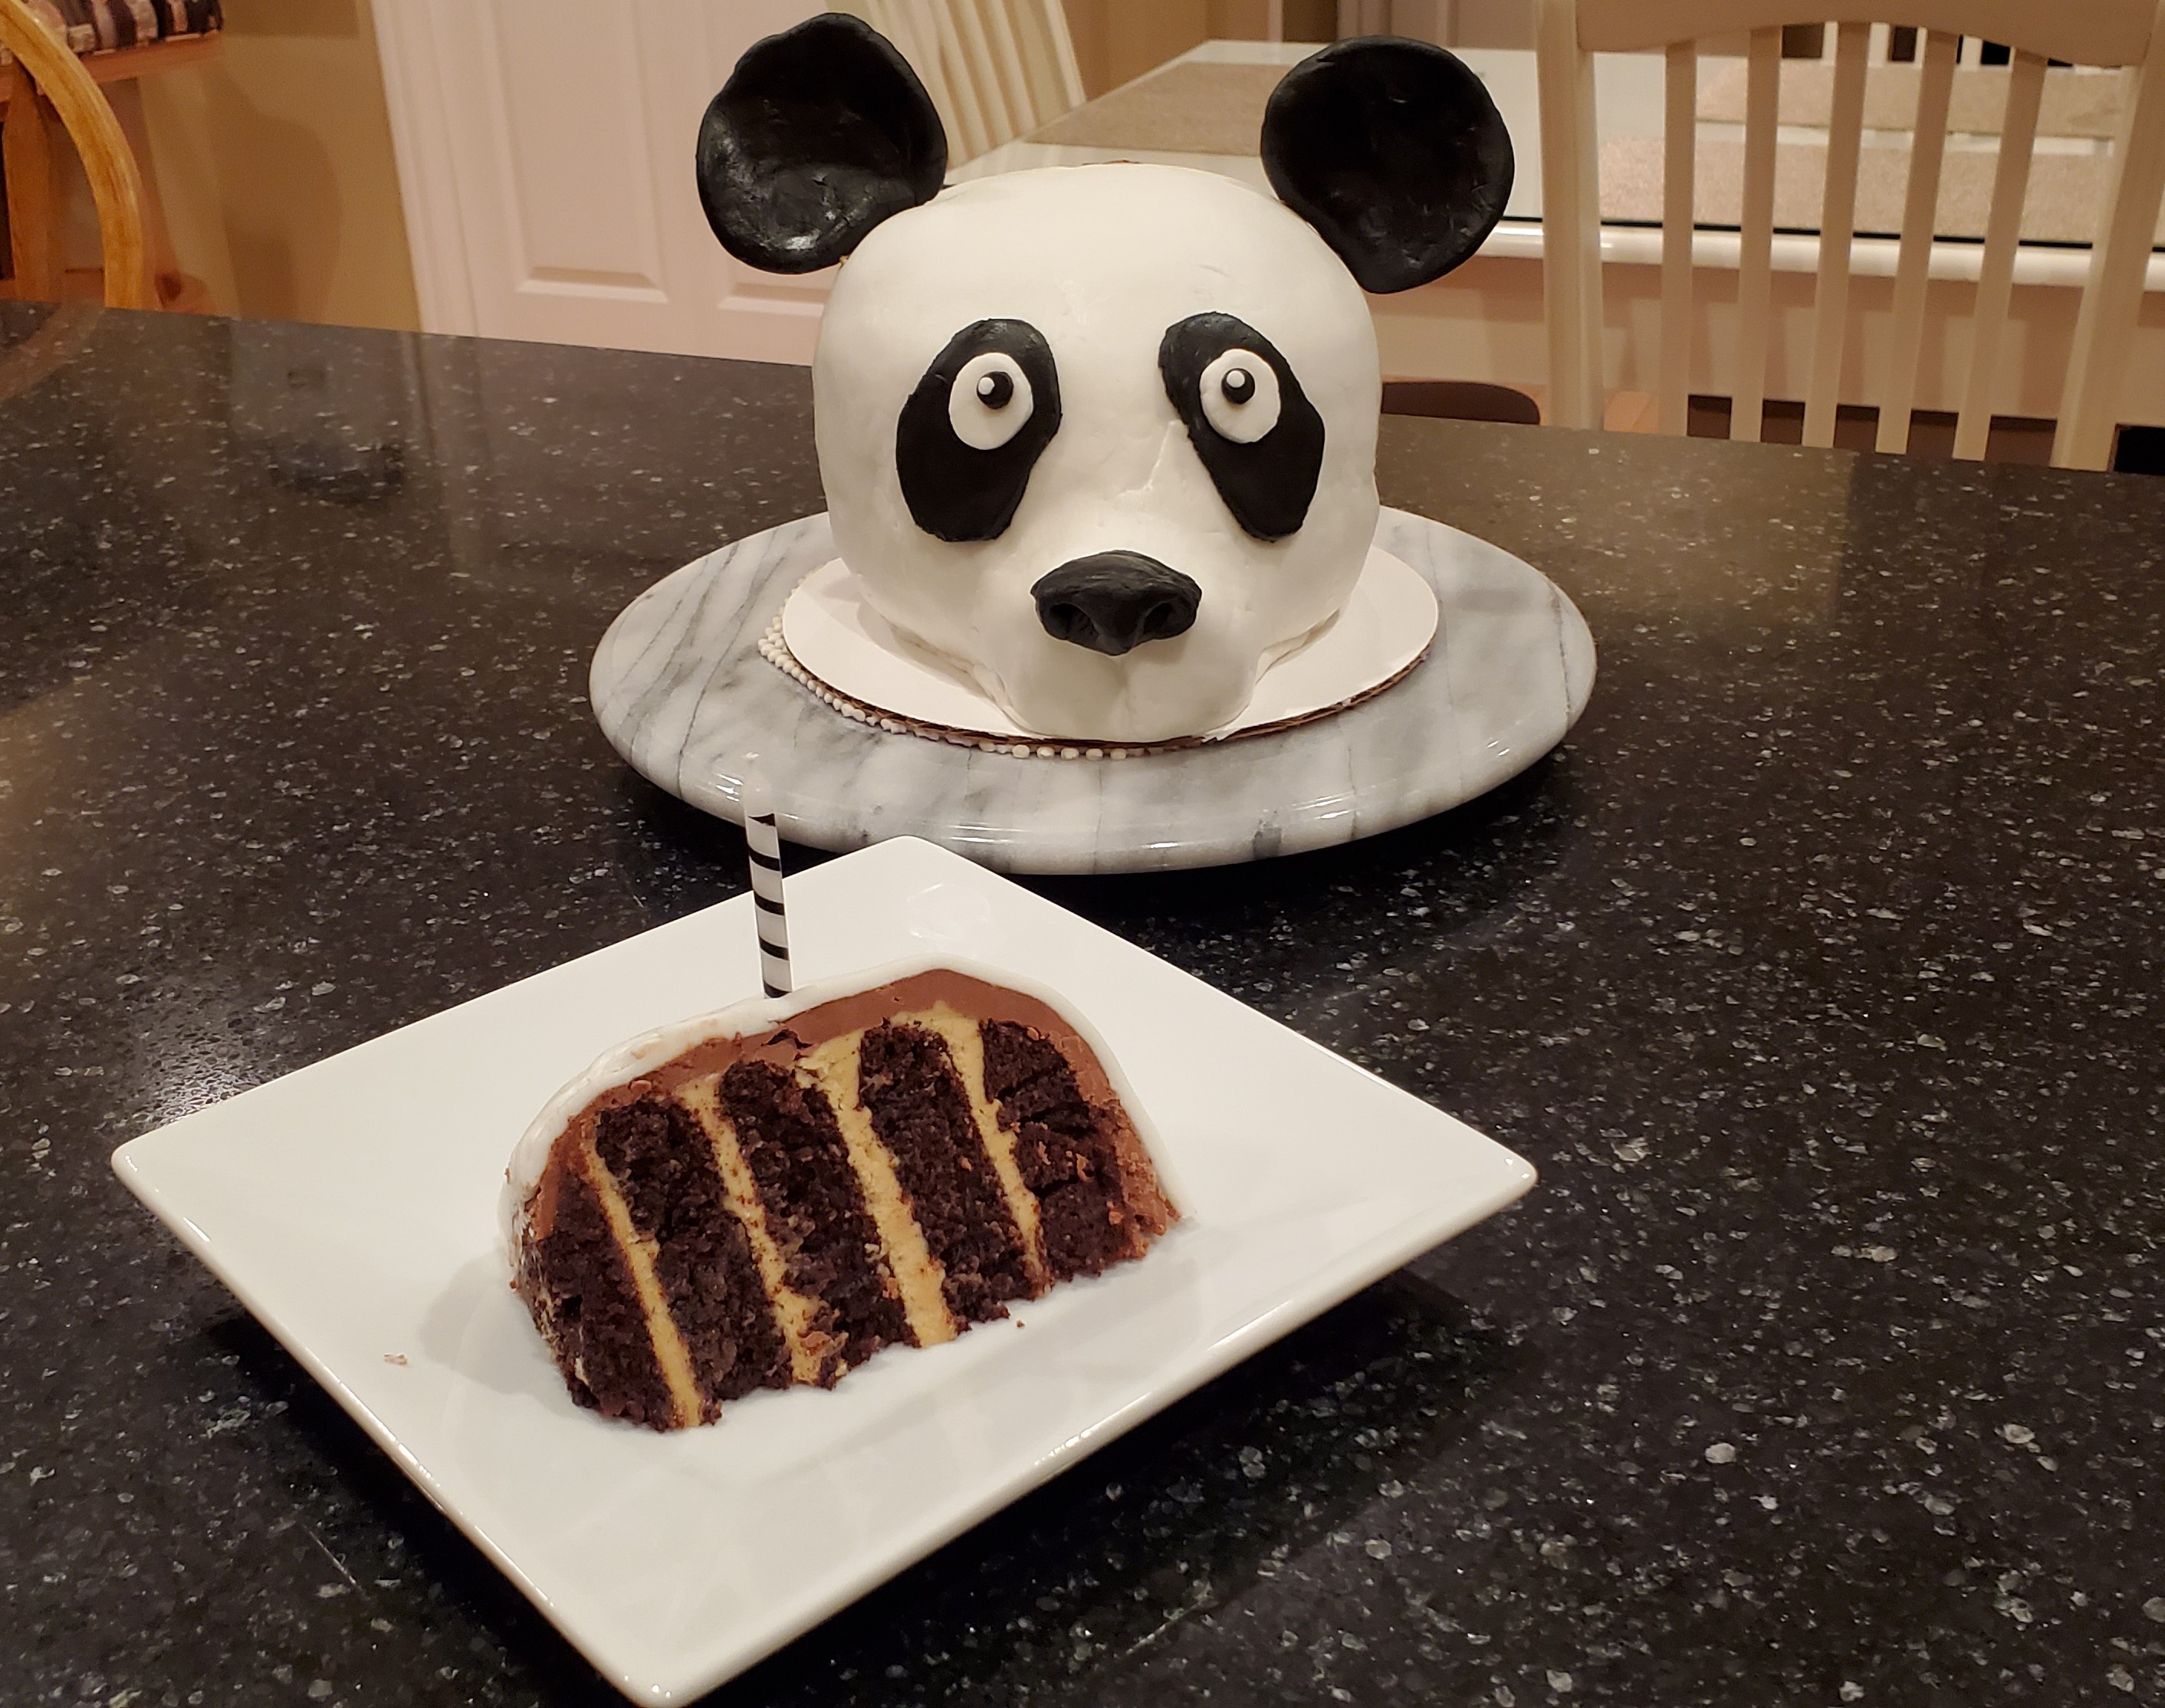 A 5 layer slice of panda chocolate cake with peanut butter and chocolate frosting.